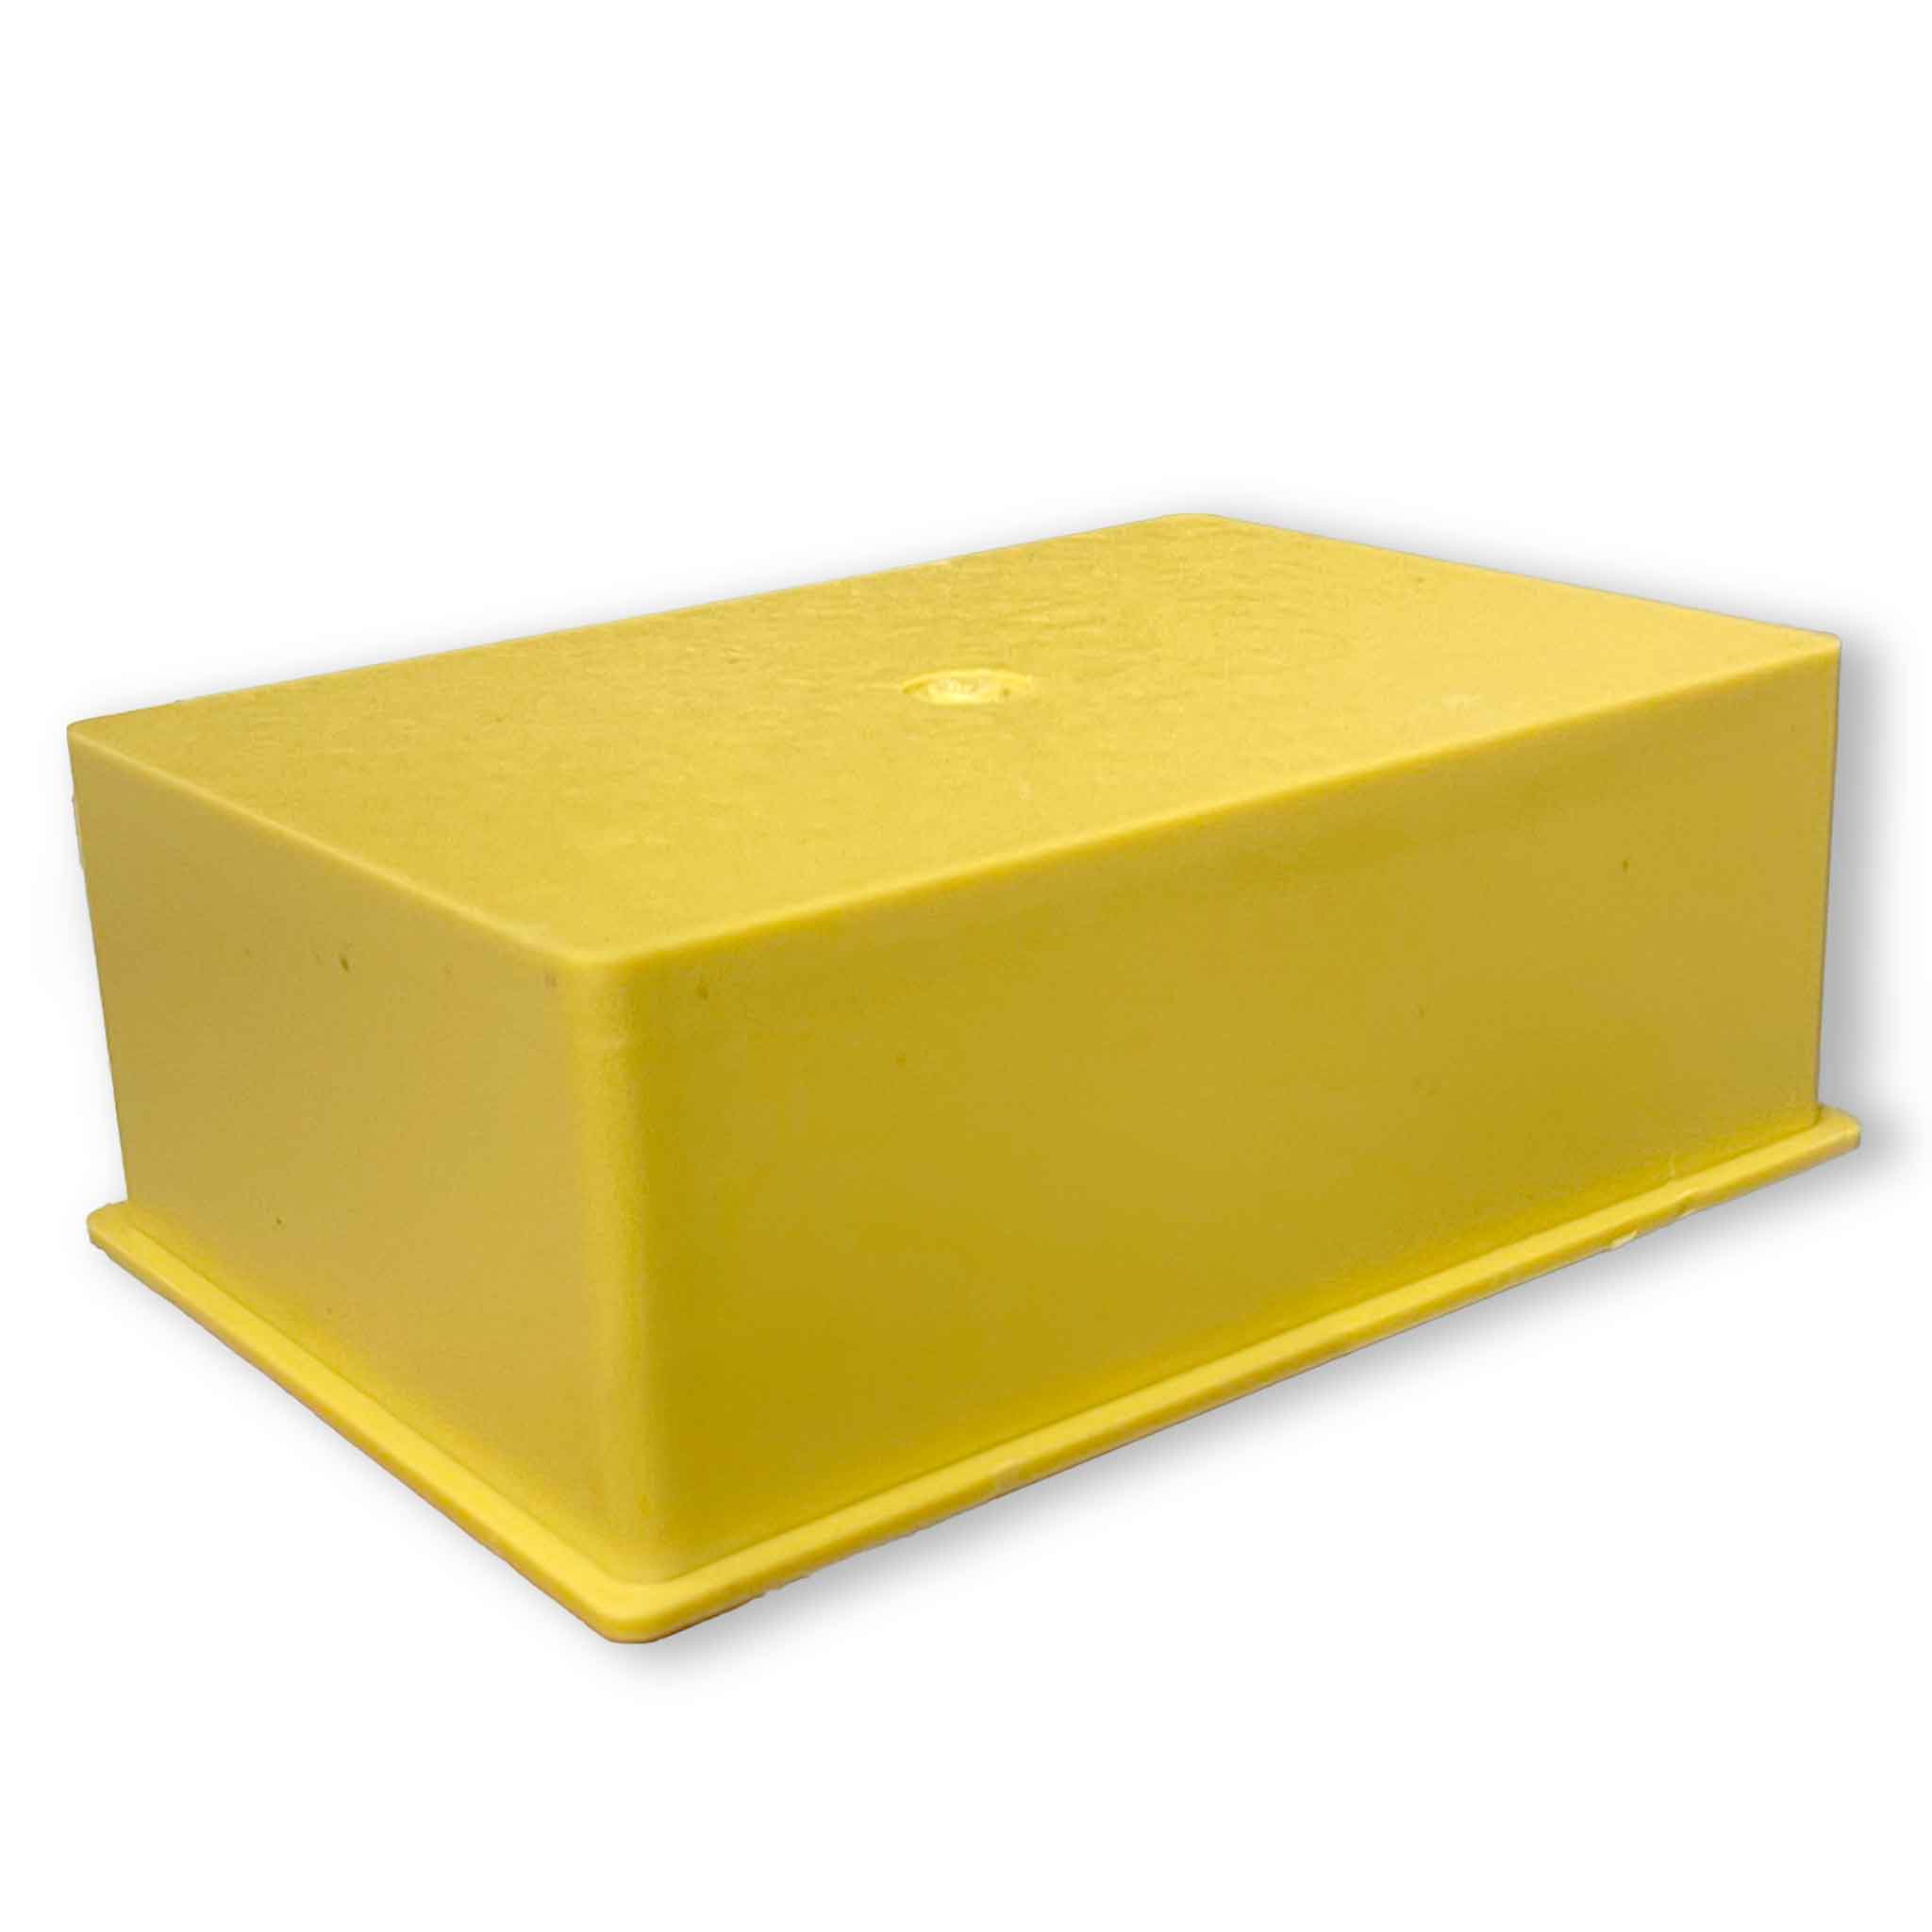 Silicon Beeswax Mould, Single Slab of 500g - Processing collection by Buzzbee Beekeeping Supplies